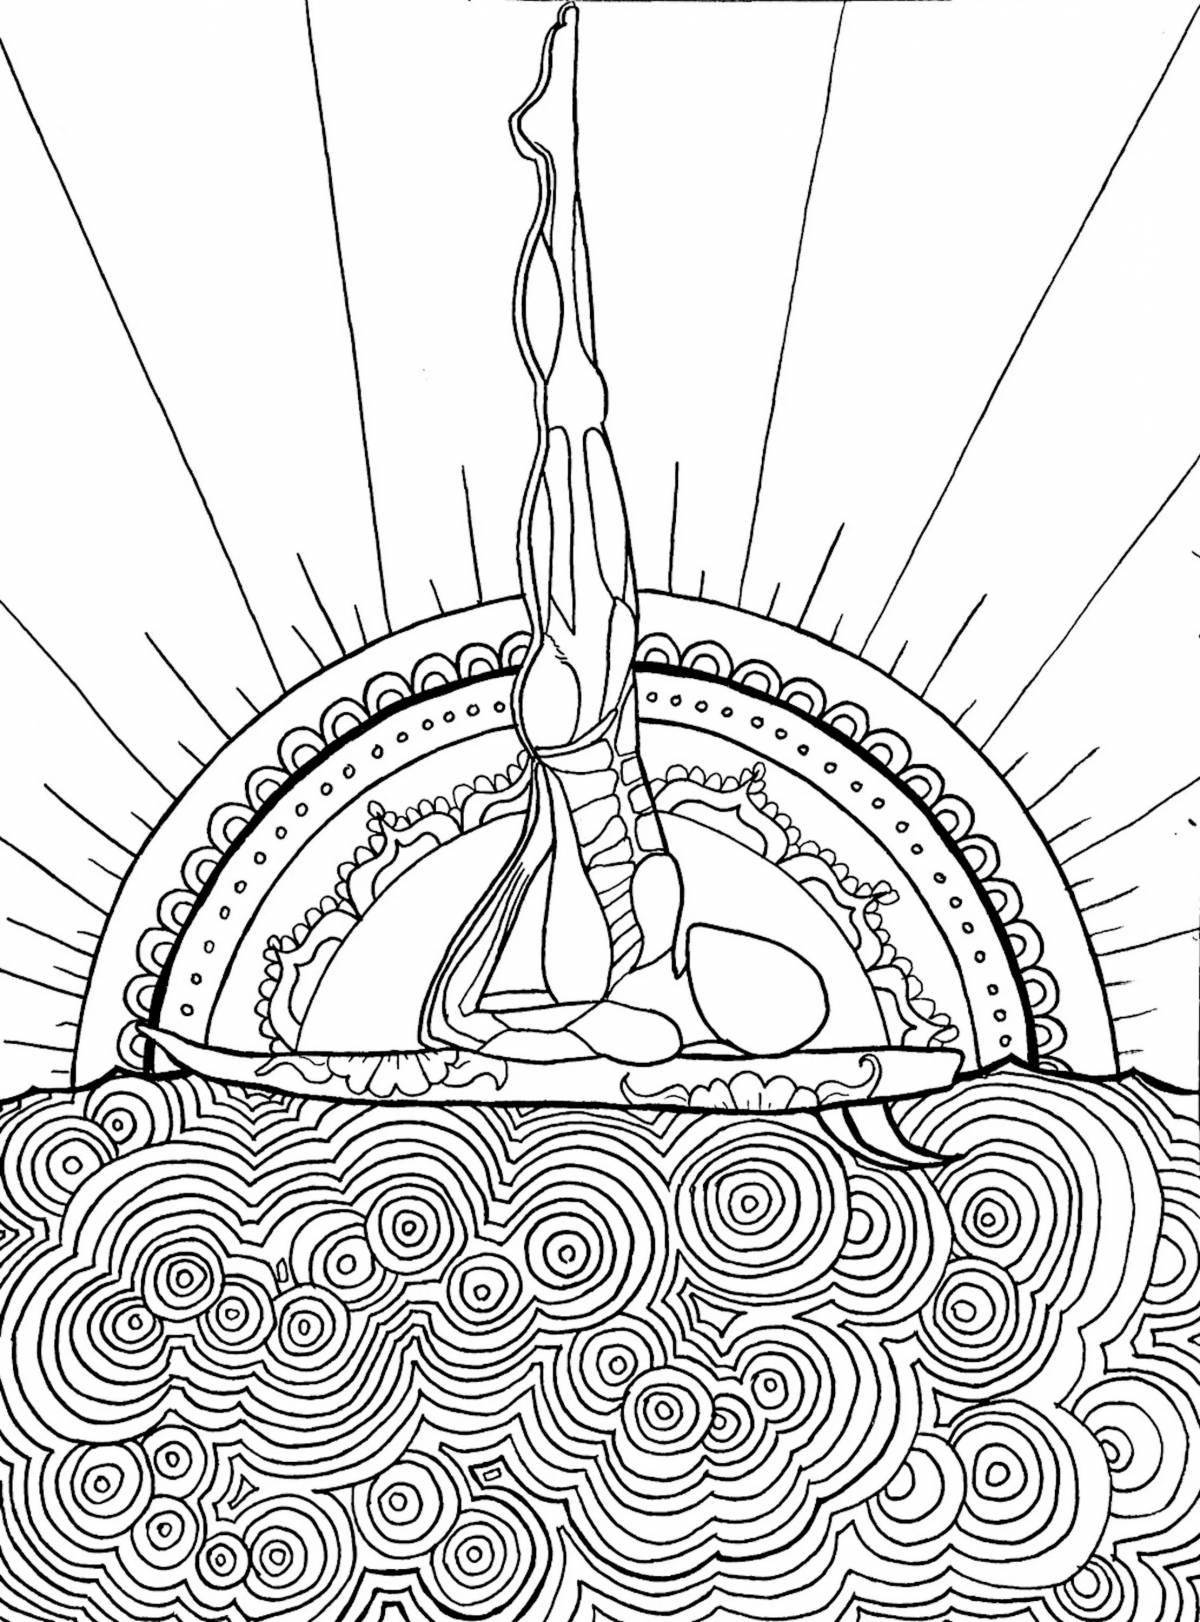 Soothing coloring book for meditation and relaxation